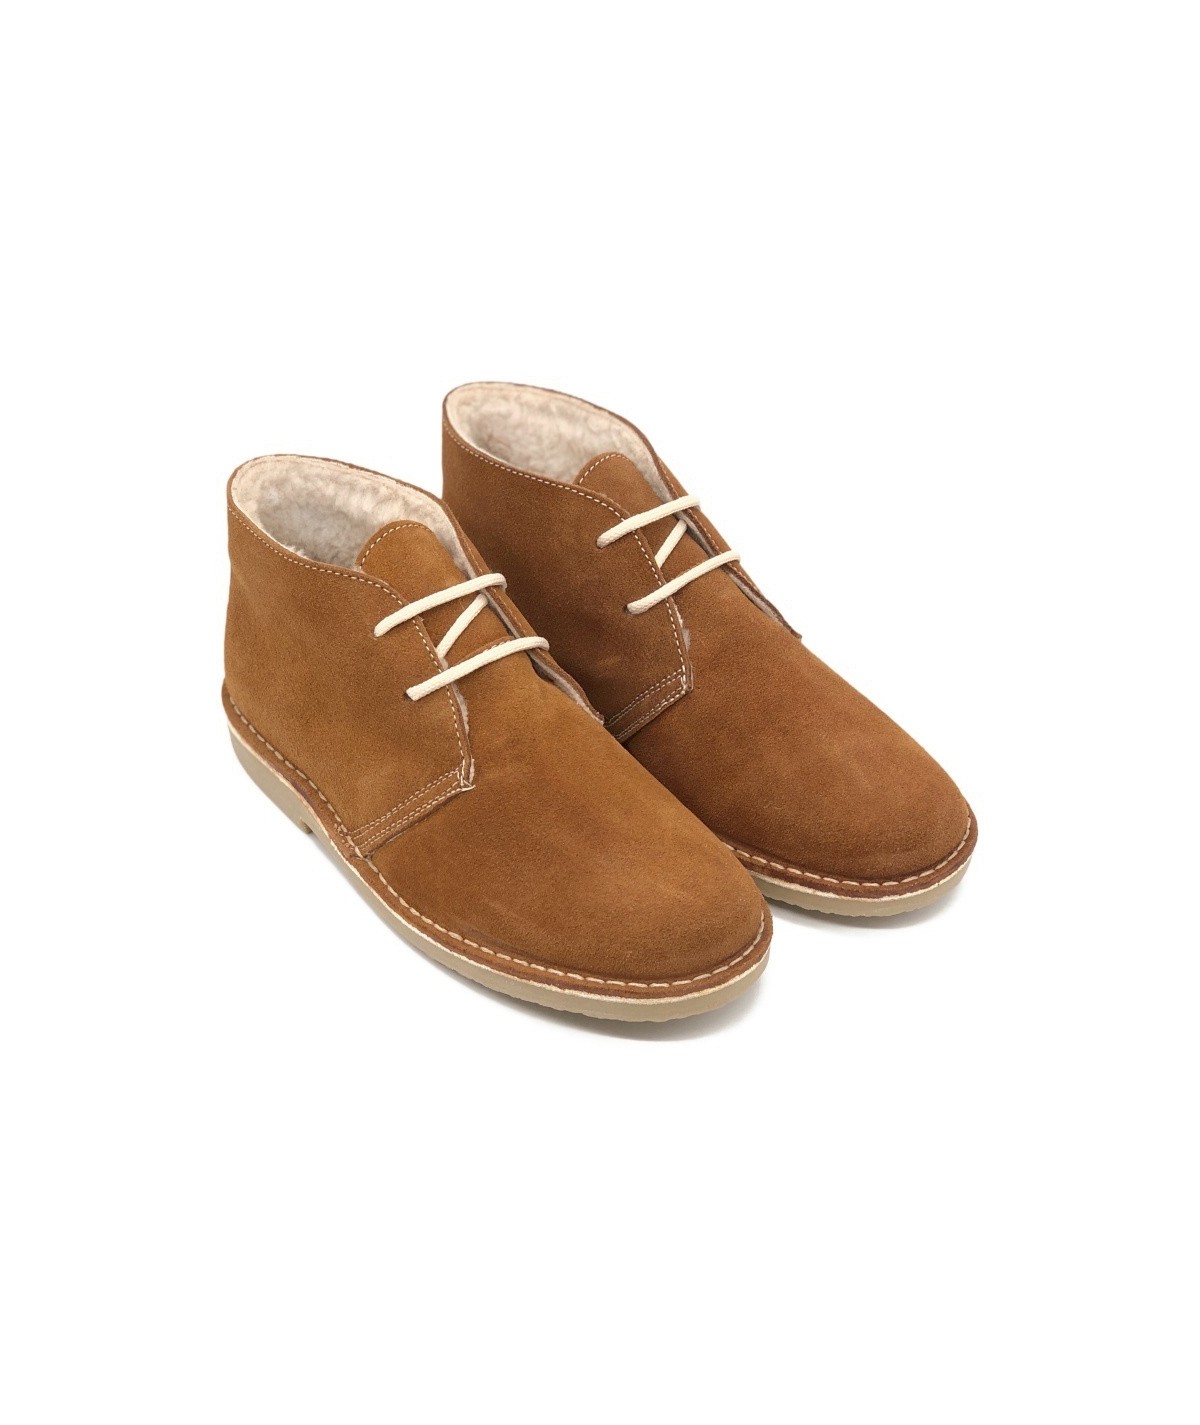 Shearling lined desert boots for women in Setter color